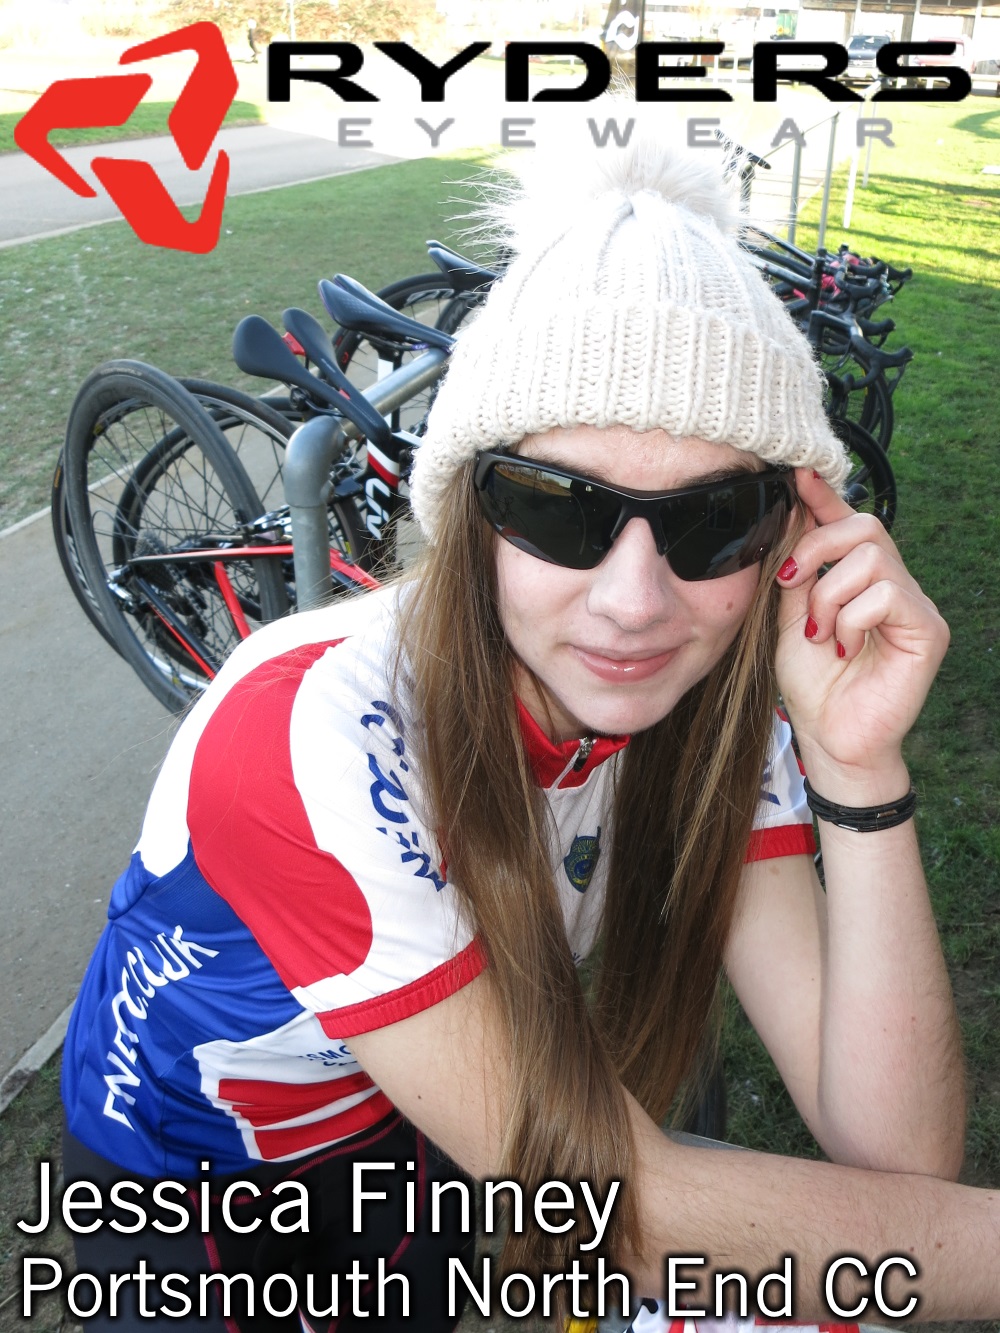 Jessica Finney (Portsmouth North End CC) wears Strider Ryders Eyewear now she's become a 3rd Cat